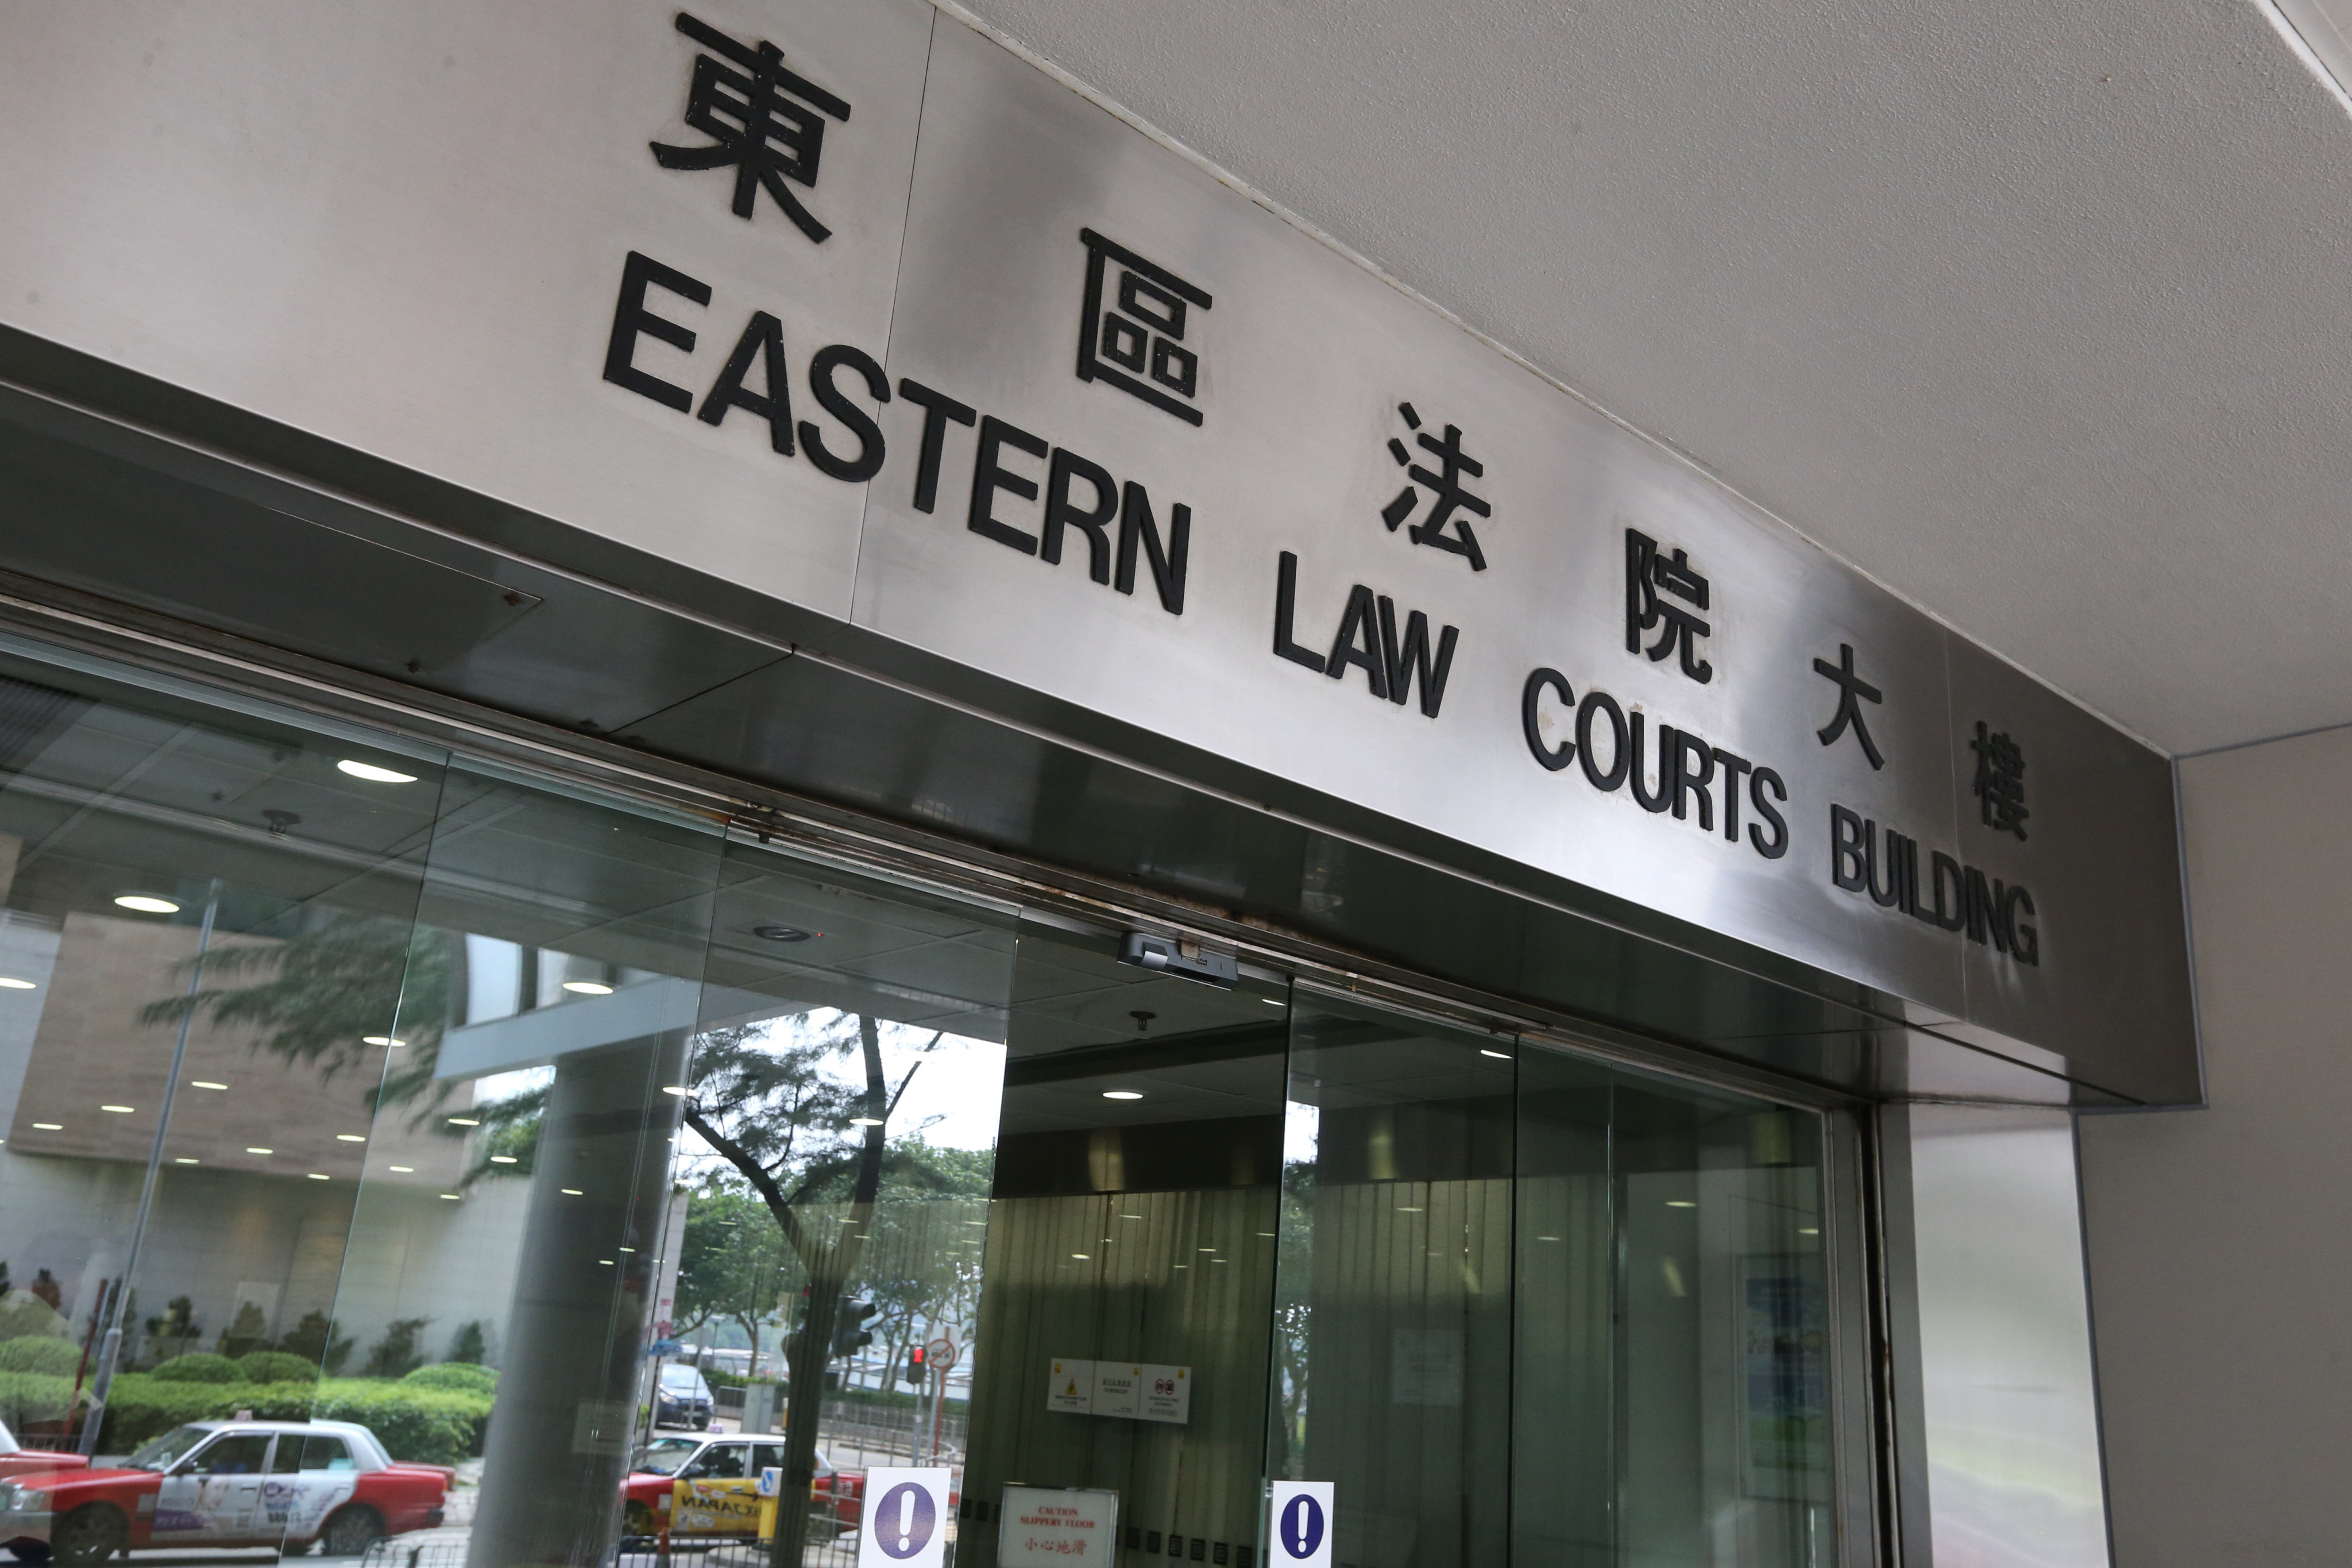 The former Cathay staff were found to have flouted quarantine rules. Photo: SCMP